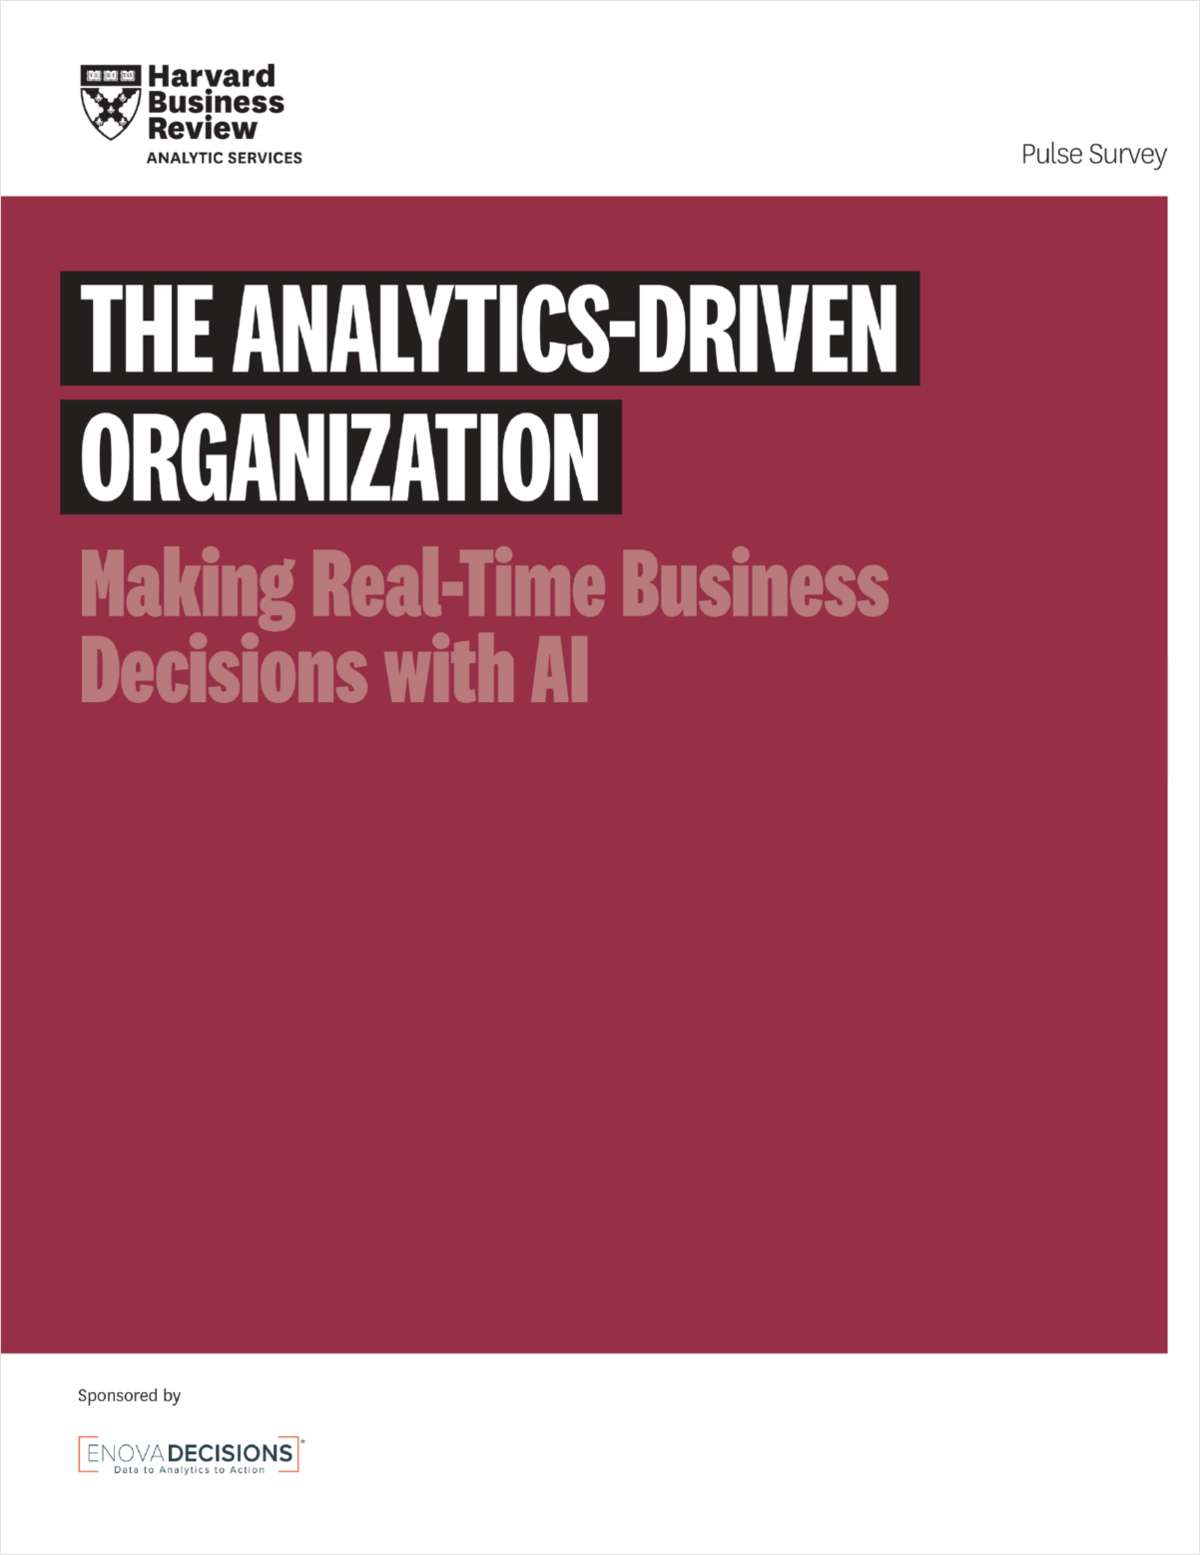 The Analytics-Driven Organization: Making Real-Time Business Decisions with AI